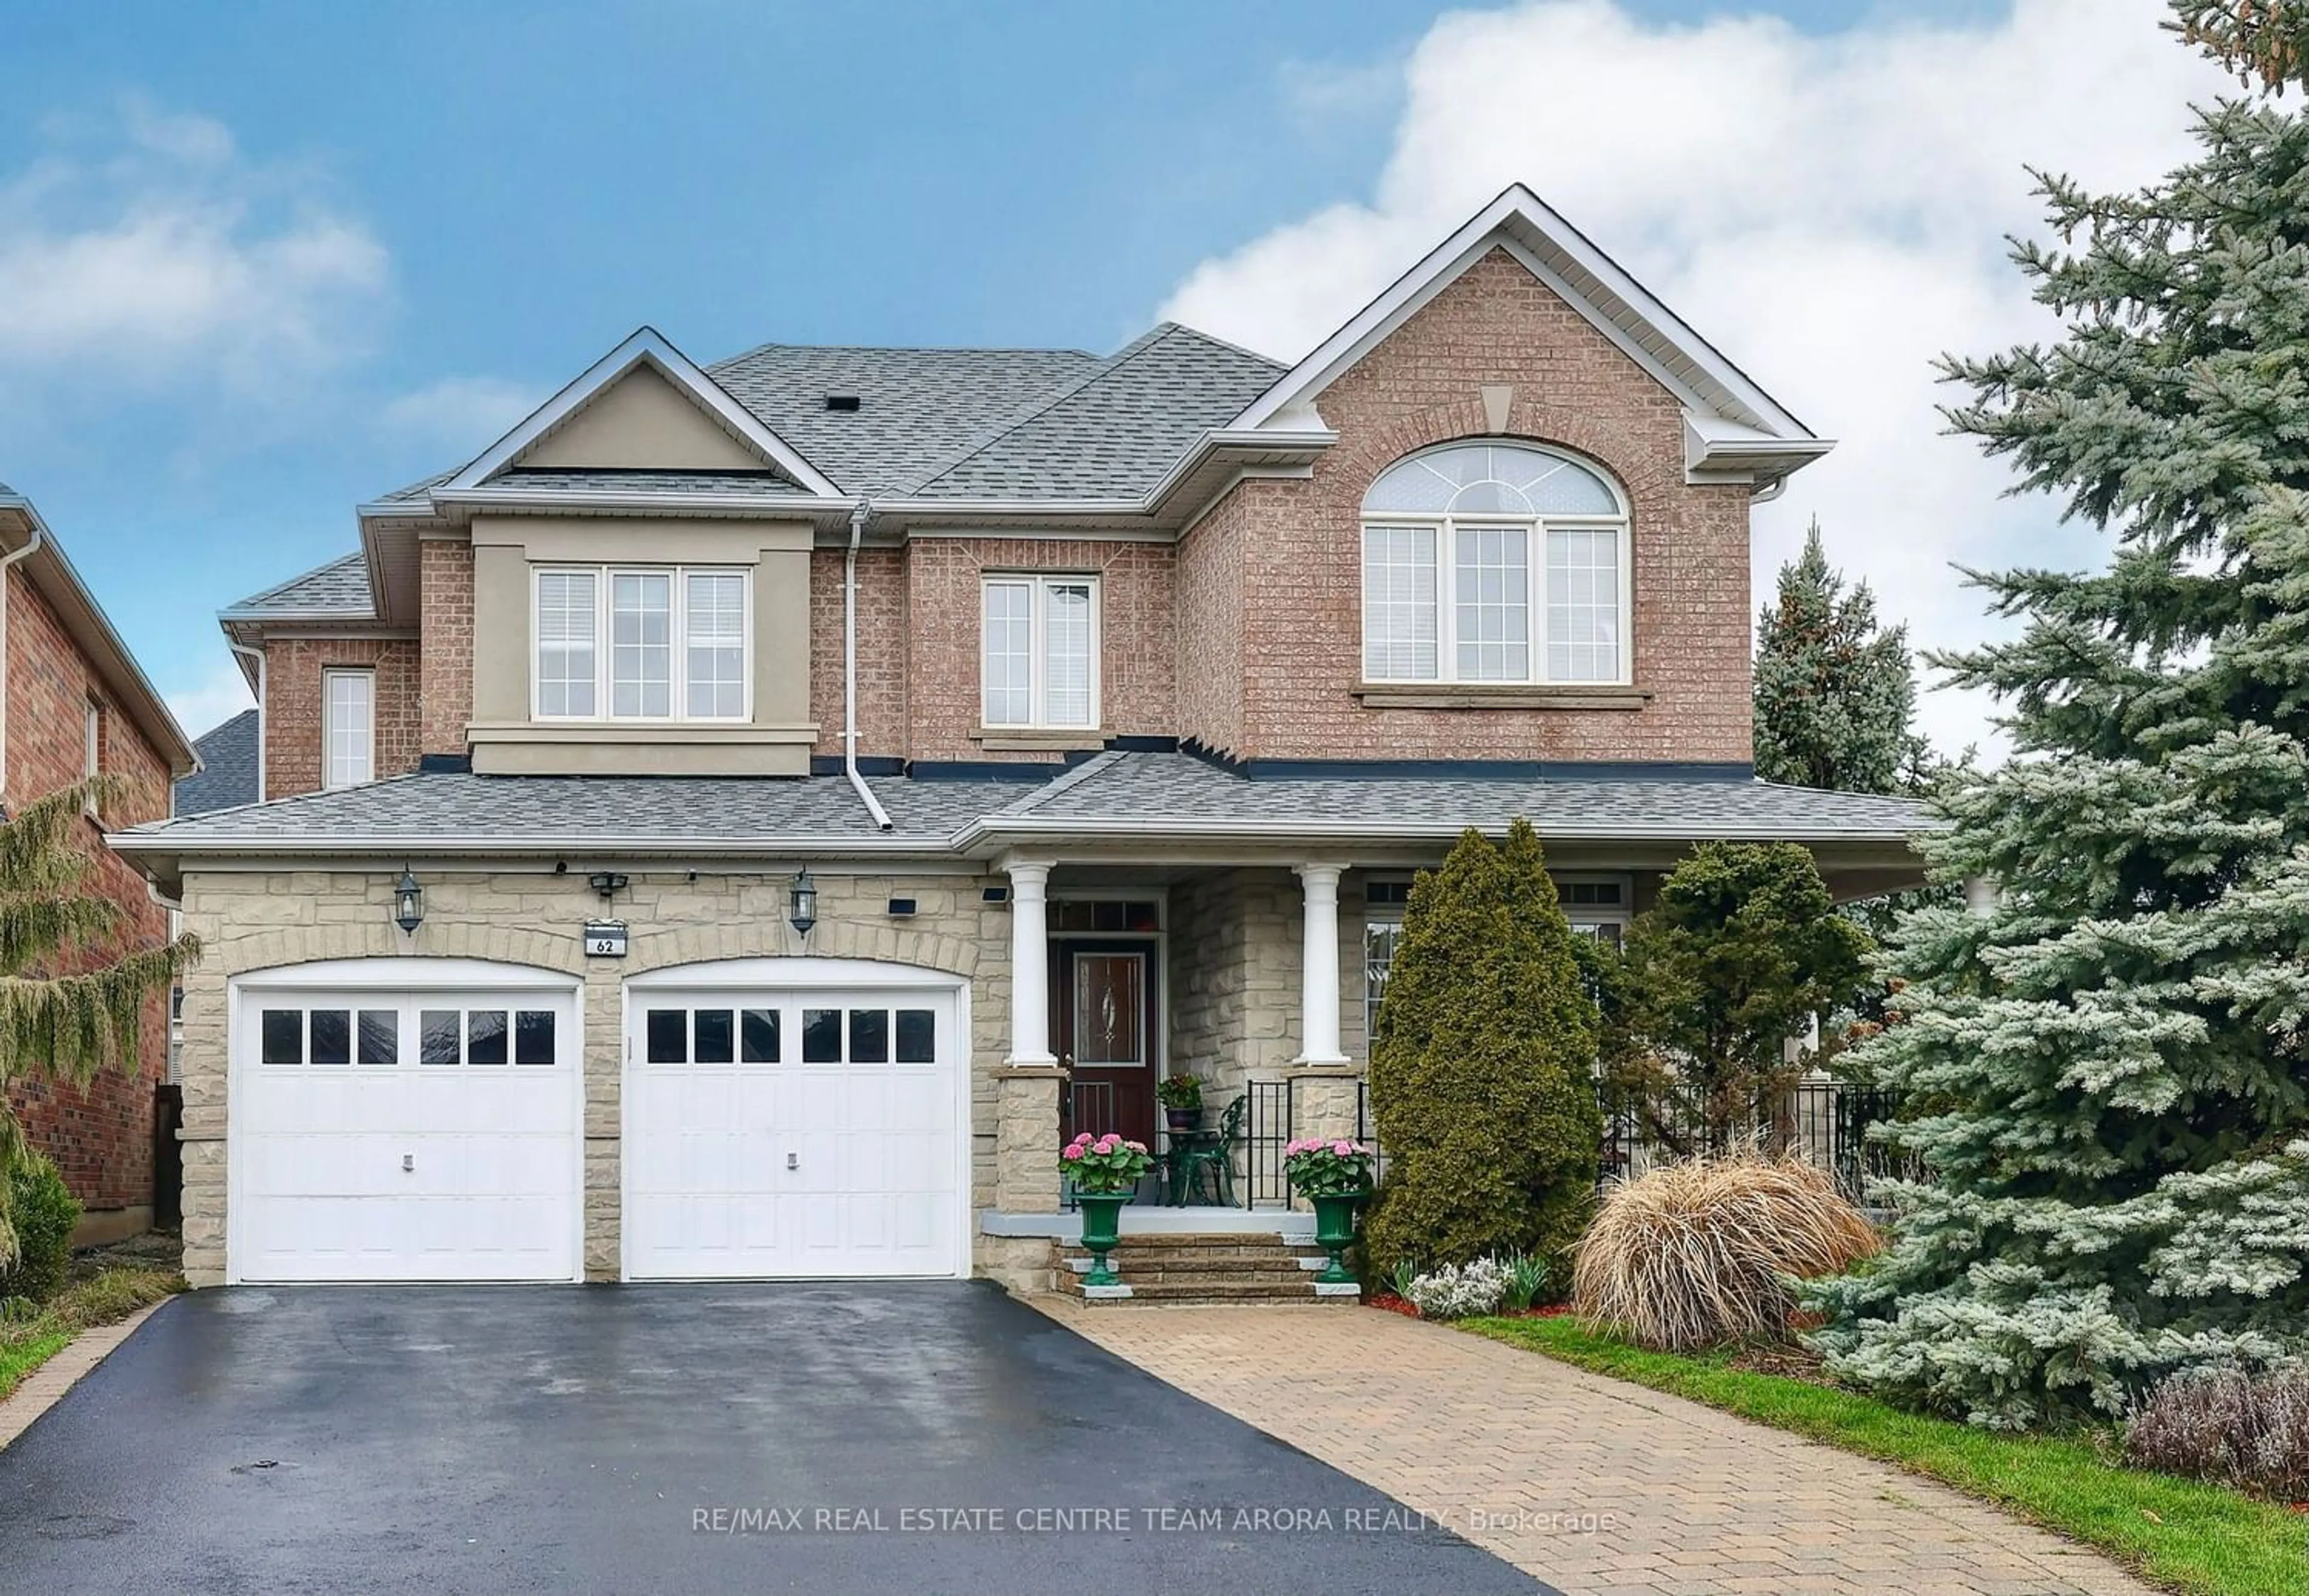 Home with brick exterior material for 62 Fogerty St, Brampton Ontario L6Y 5K1